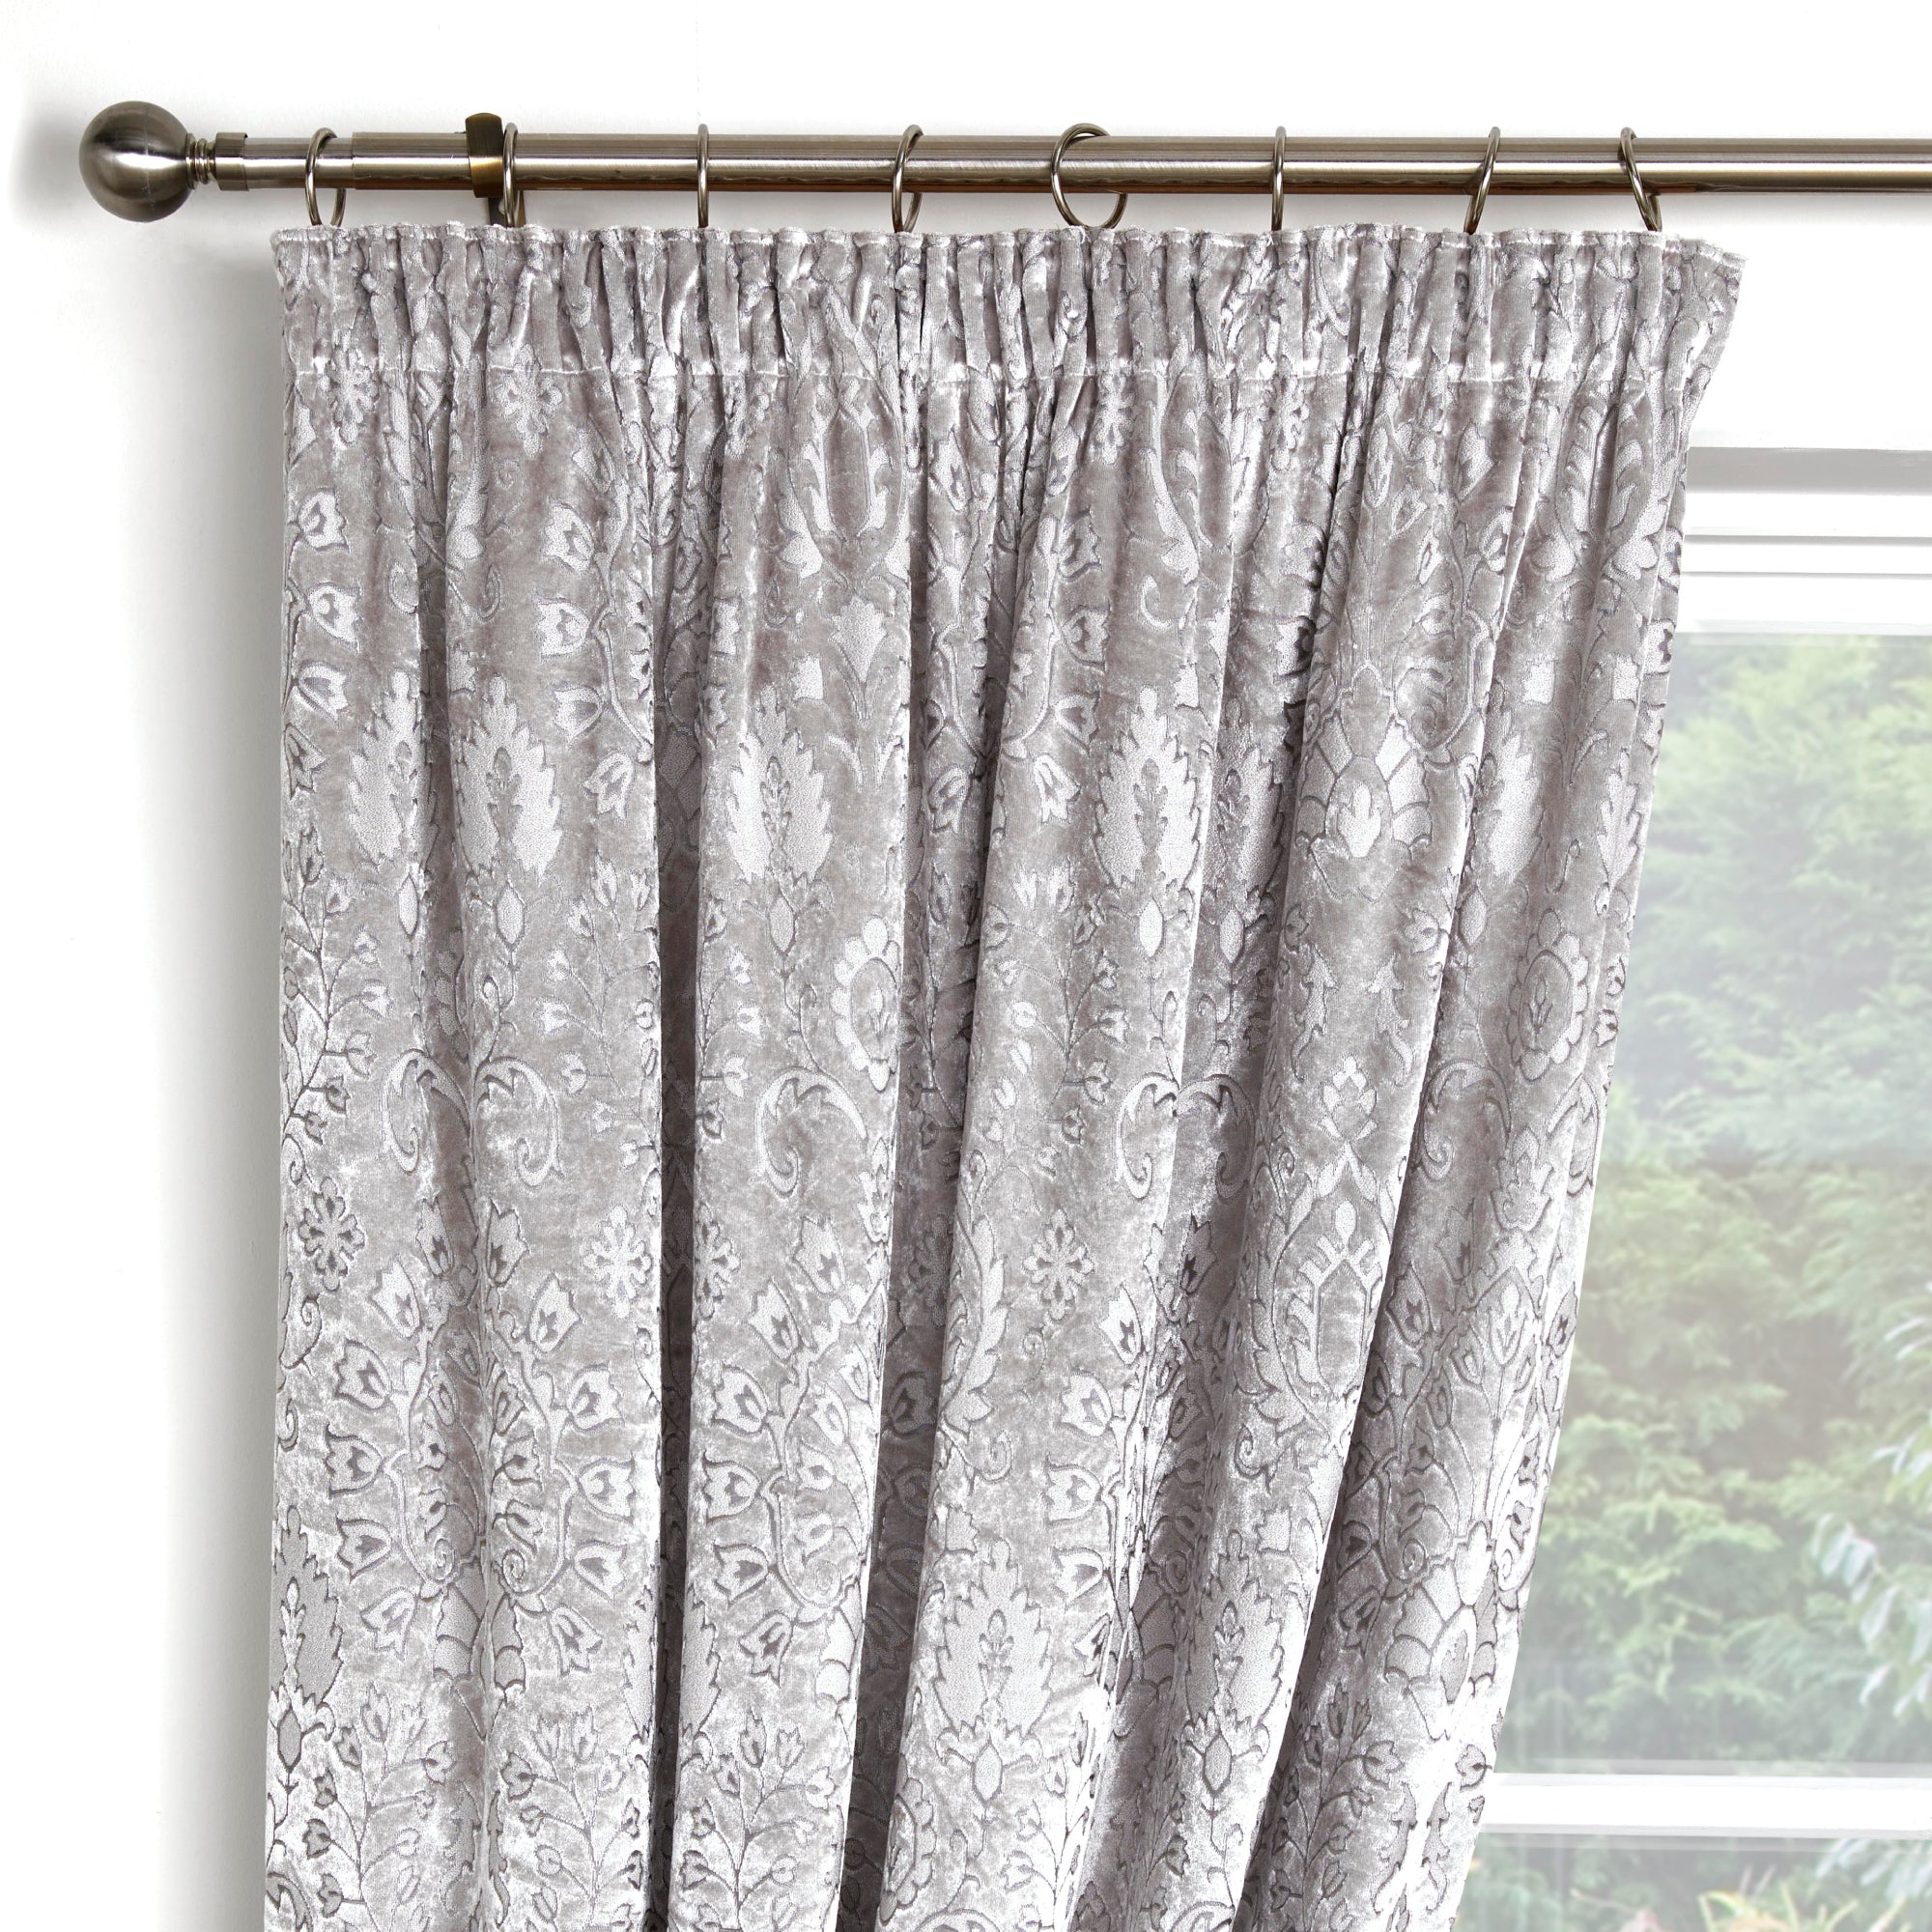 Pair of Pencil Pleat Curtains Trinity by Curtina in Silver